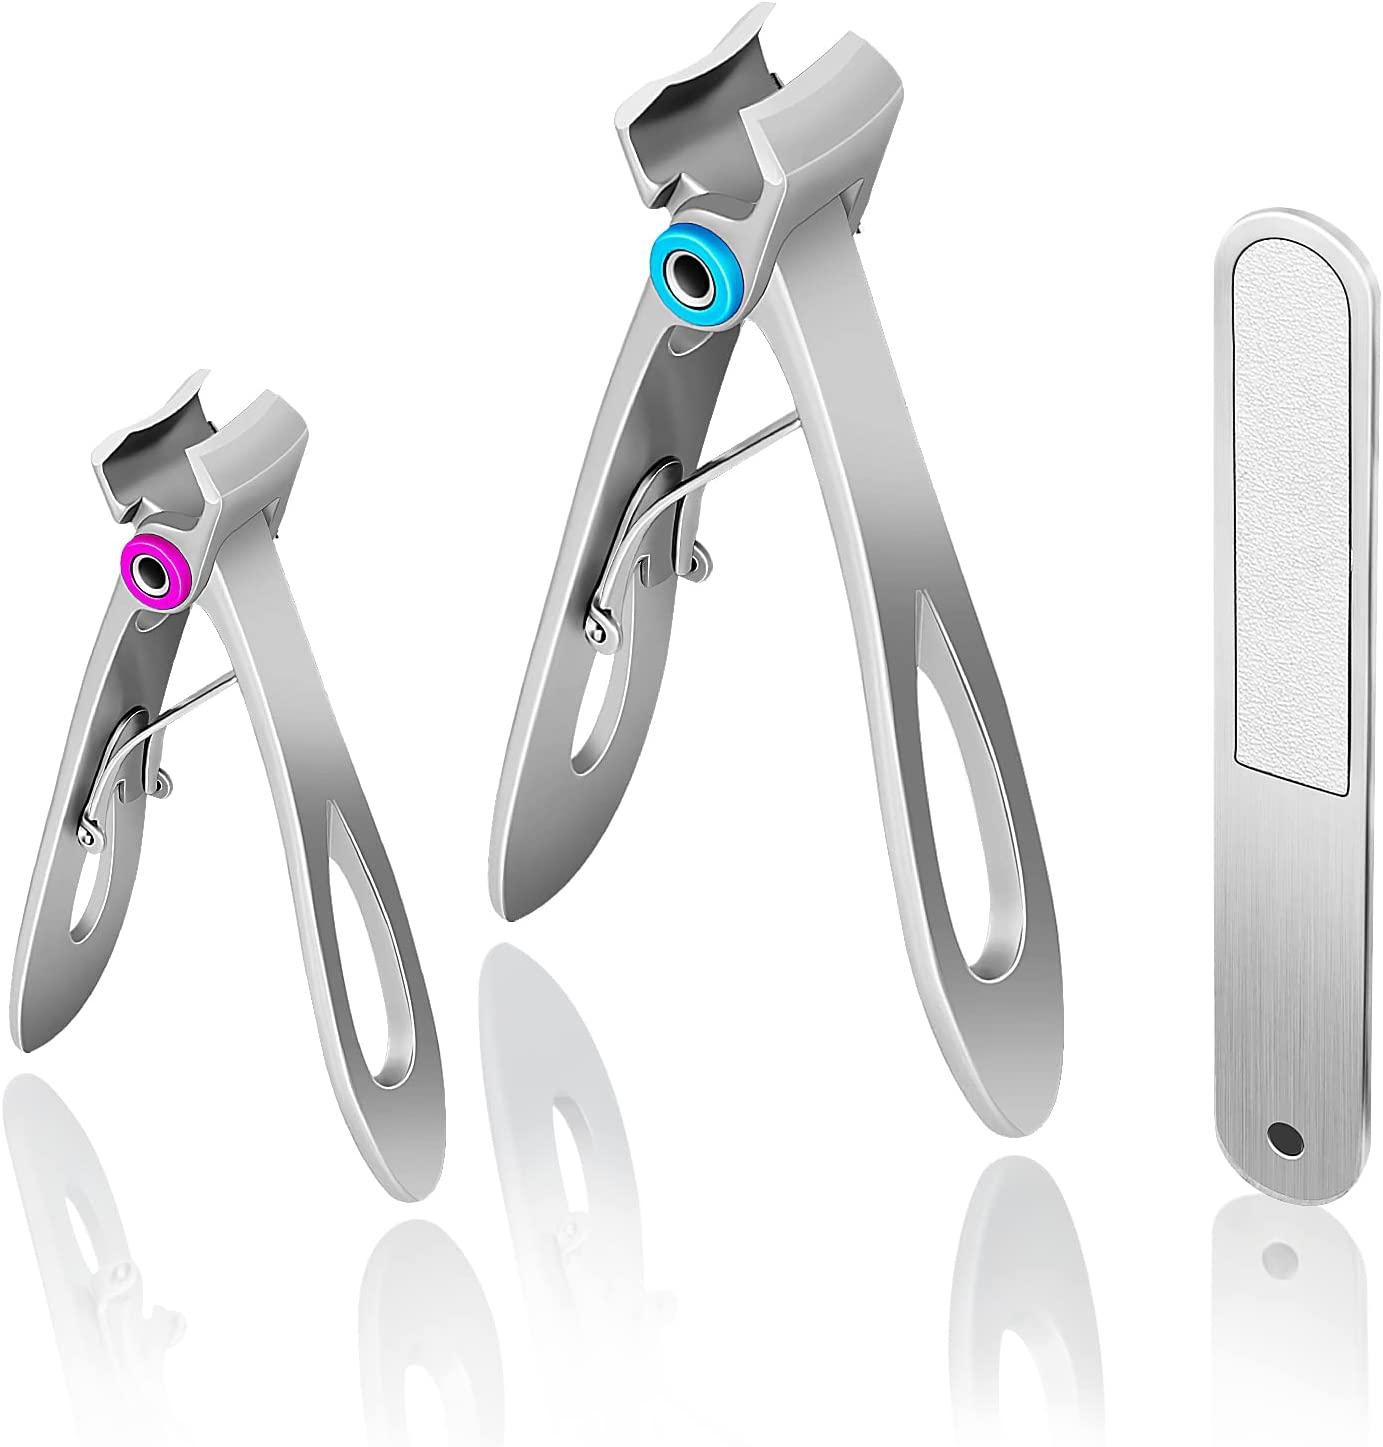 15mm Wide Jaw Opening Nail Clippers for Thick Nails, Finger Nail Clippers  for Ingrown Toenail Clippers for Men, Tough Nails, Seniors, Adults.Deluxe  Sturdy Stainless Steel Big 